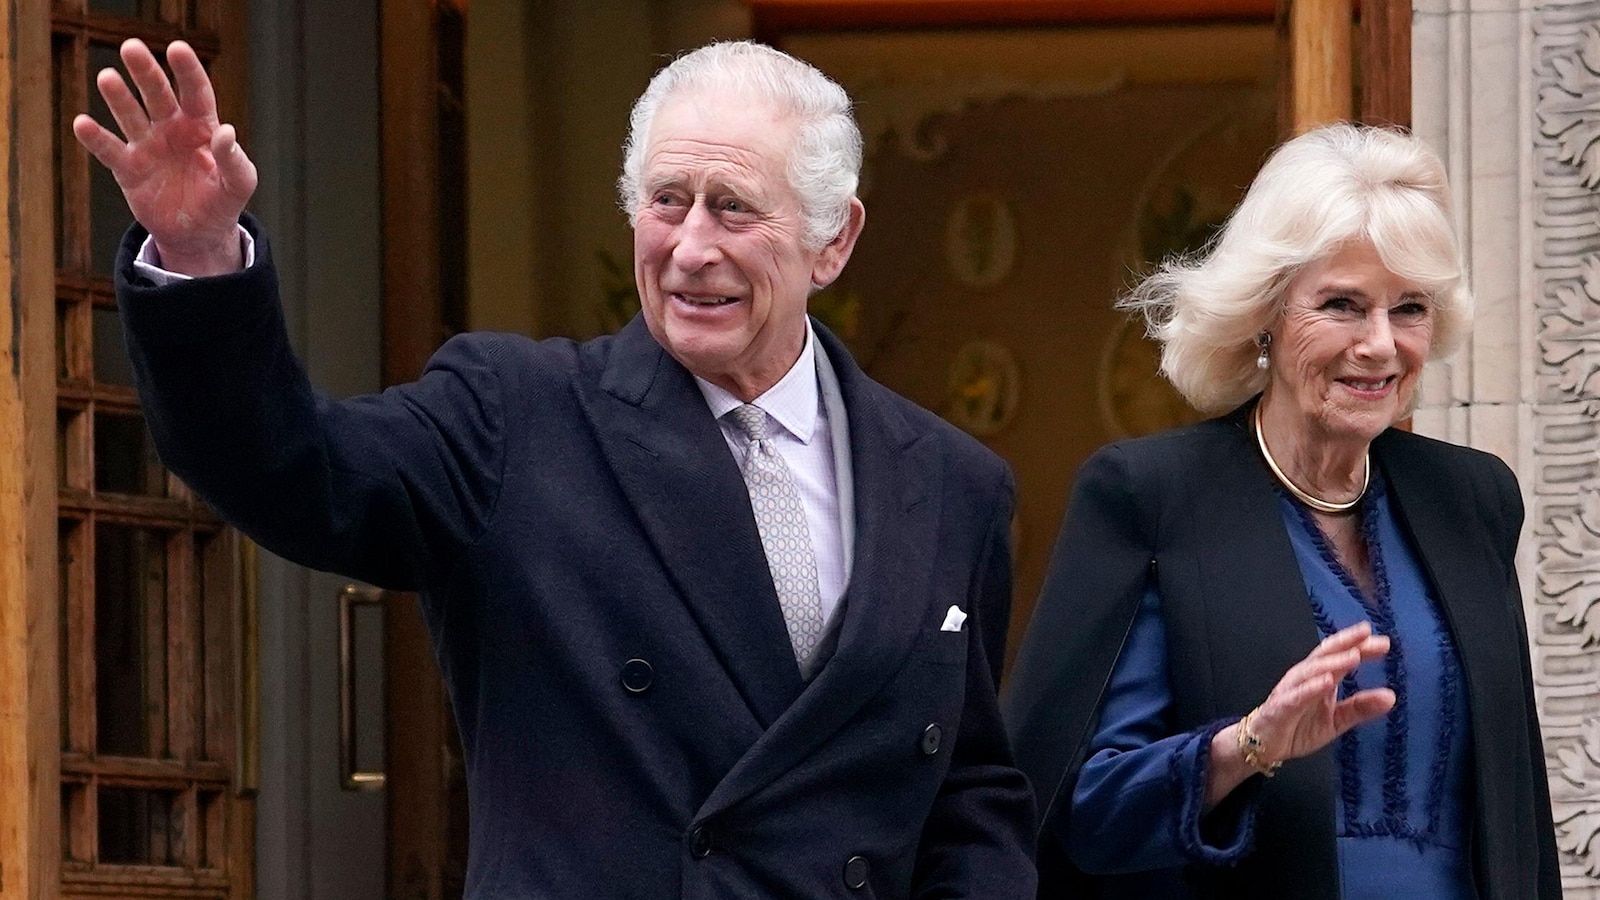 King Charles III and Queen Camilla Scheduled to Attend Easter Sunday Service in Windsor